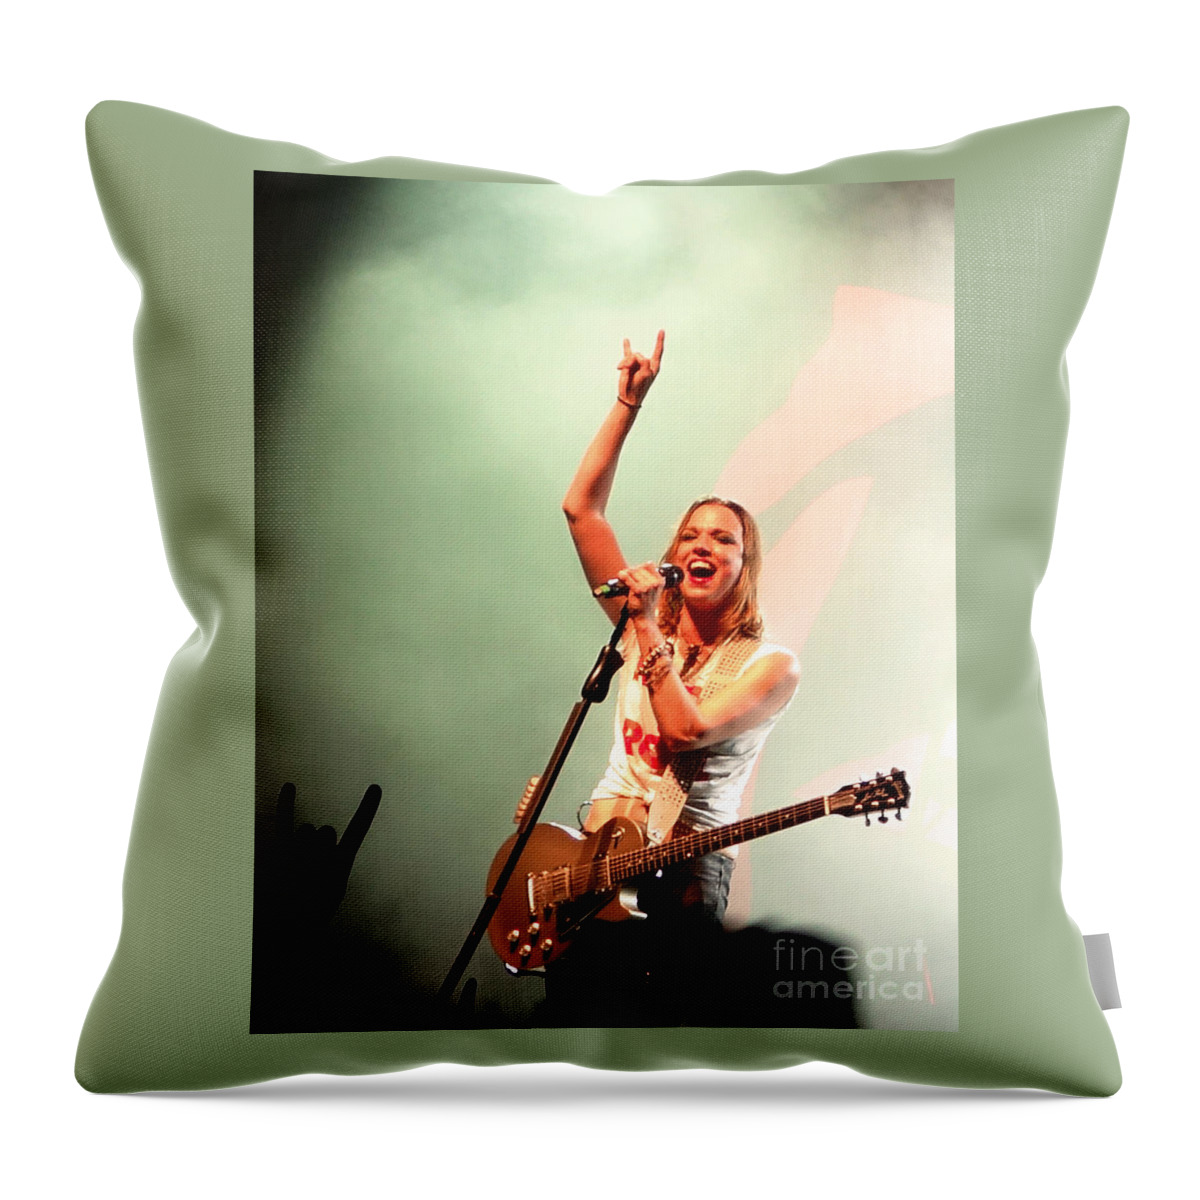 Halestorm Throw Pillow featuring the photograph Halestorm Lzzy Hale by Jennifer Camp